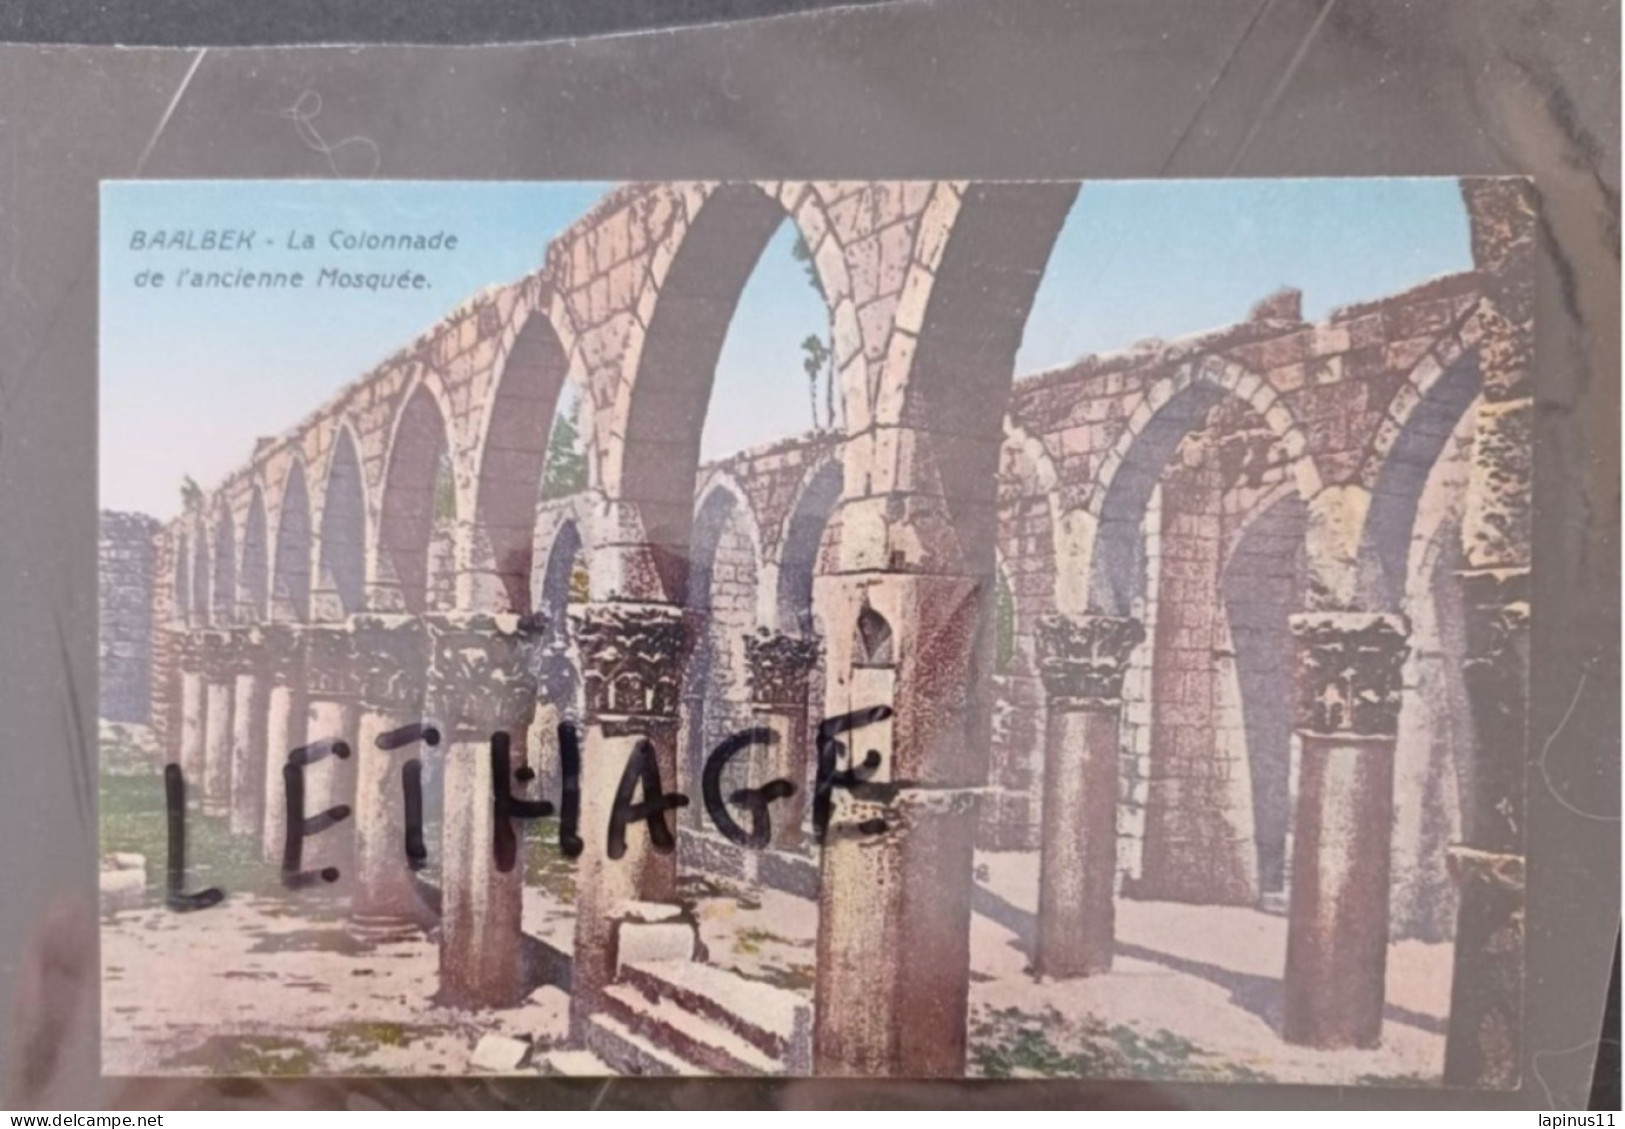 LIBAN BAALBECK COLONNADE MOSQUEE POSTCARD NEW TYPOGRAPHIC PRINT PRODUCED BY SARRAFIAN BROS BEIRUT (COLLECTOR'S)#1/169 - Libano